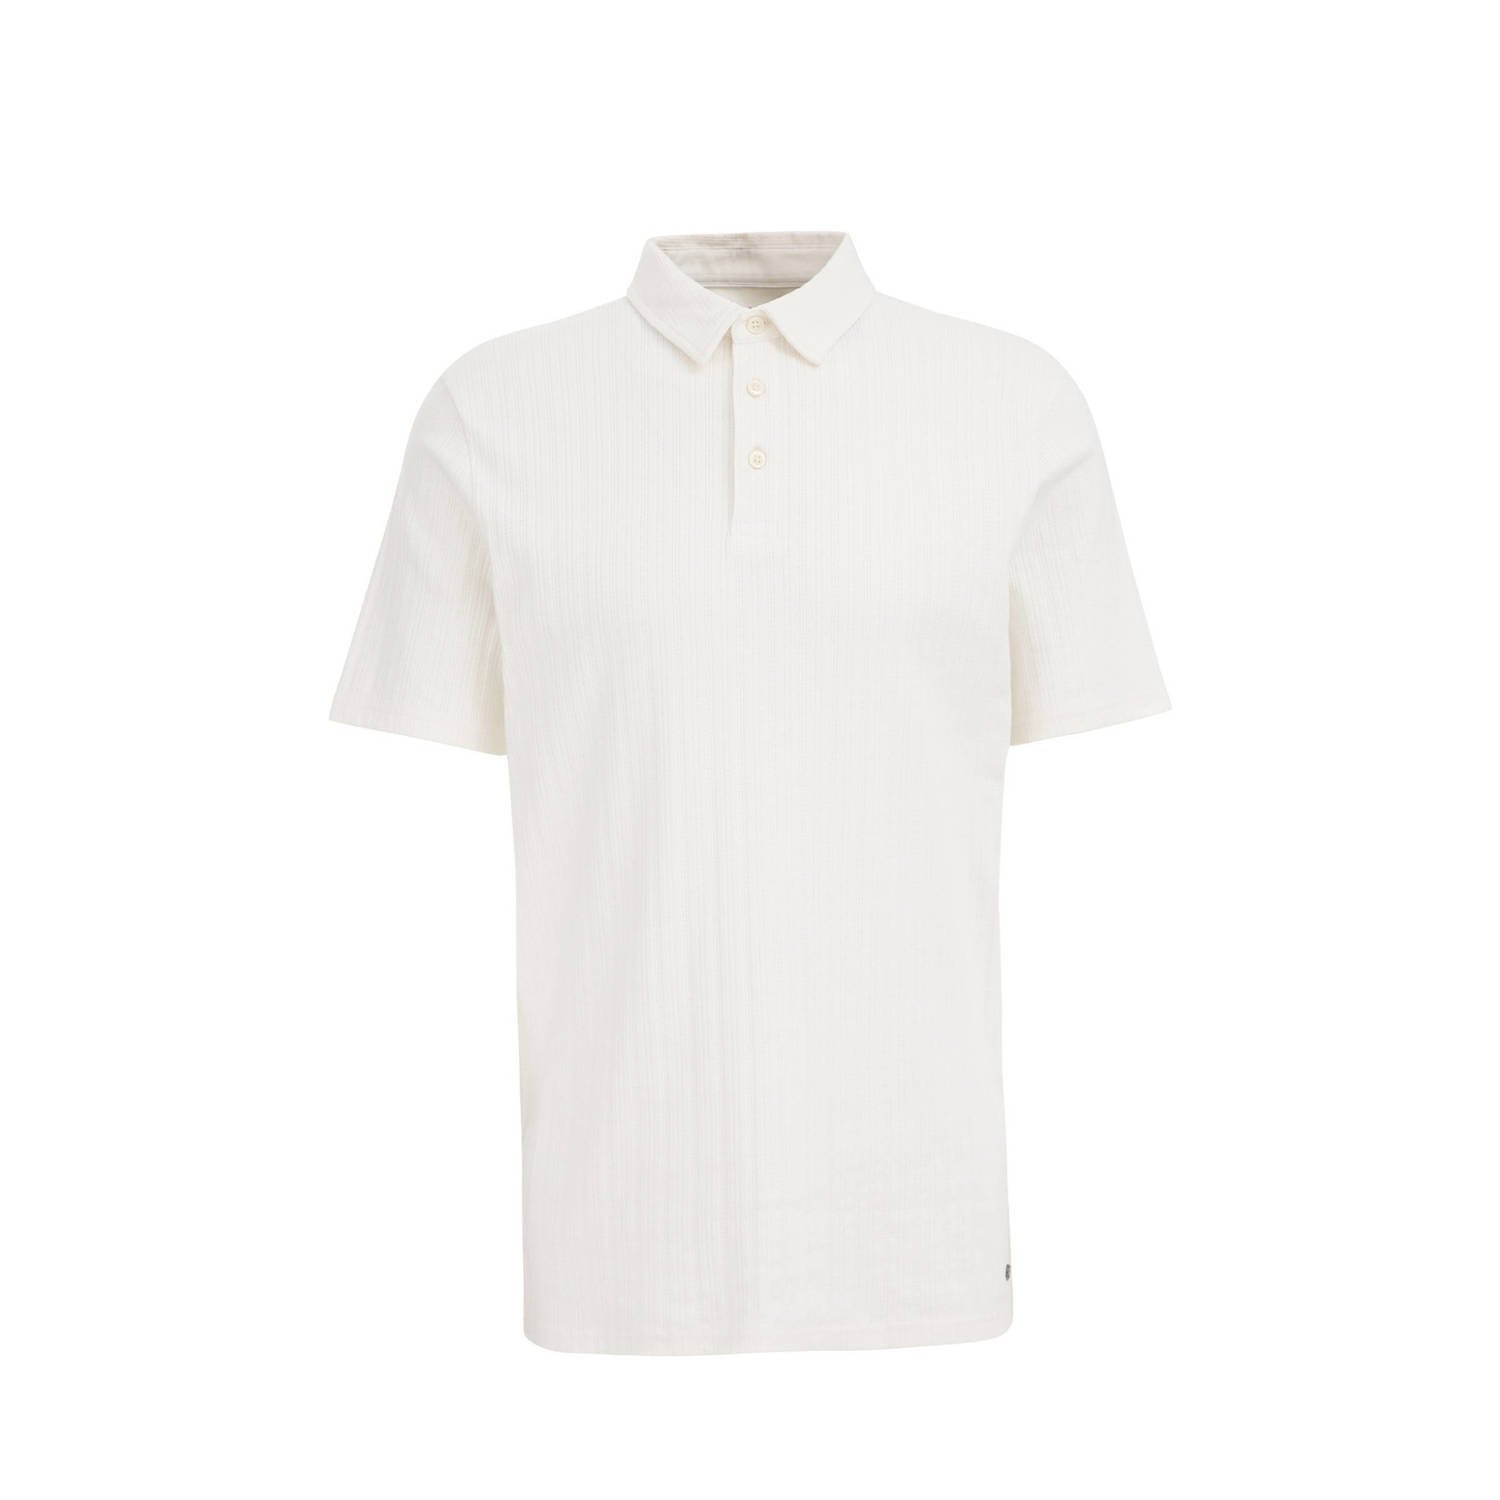 WE Fashion regular fit polo new ivory